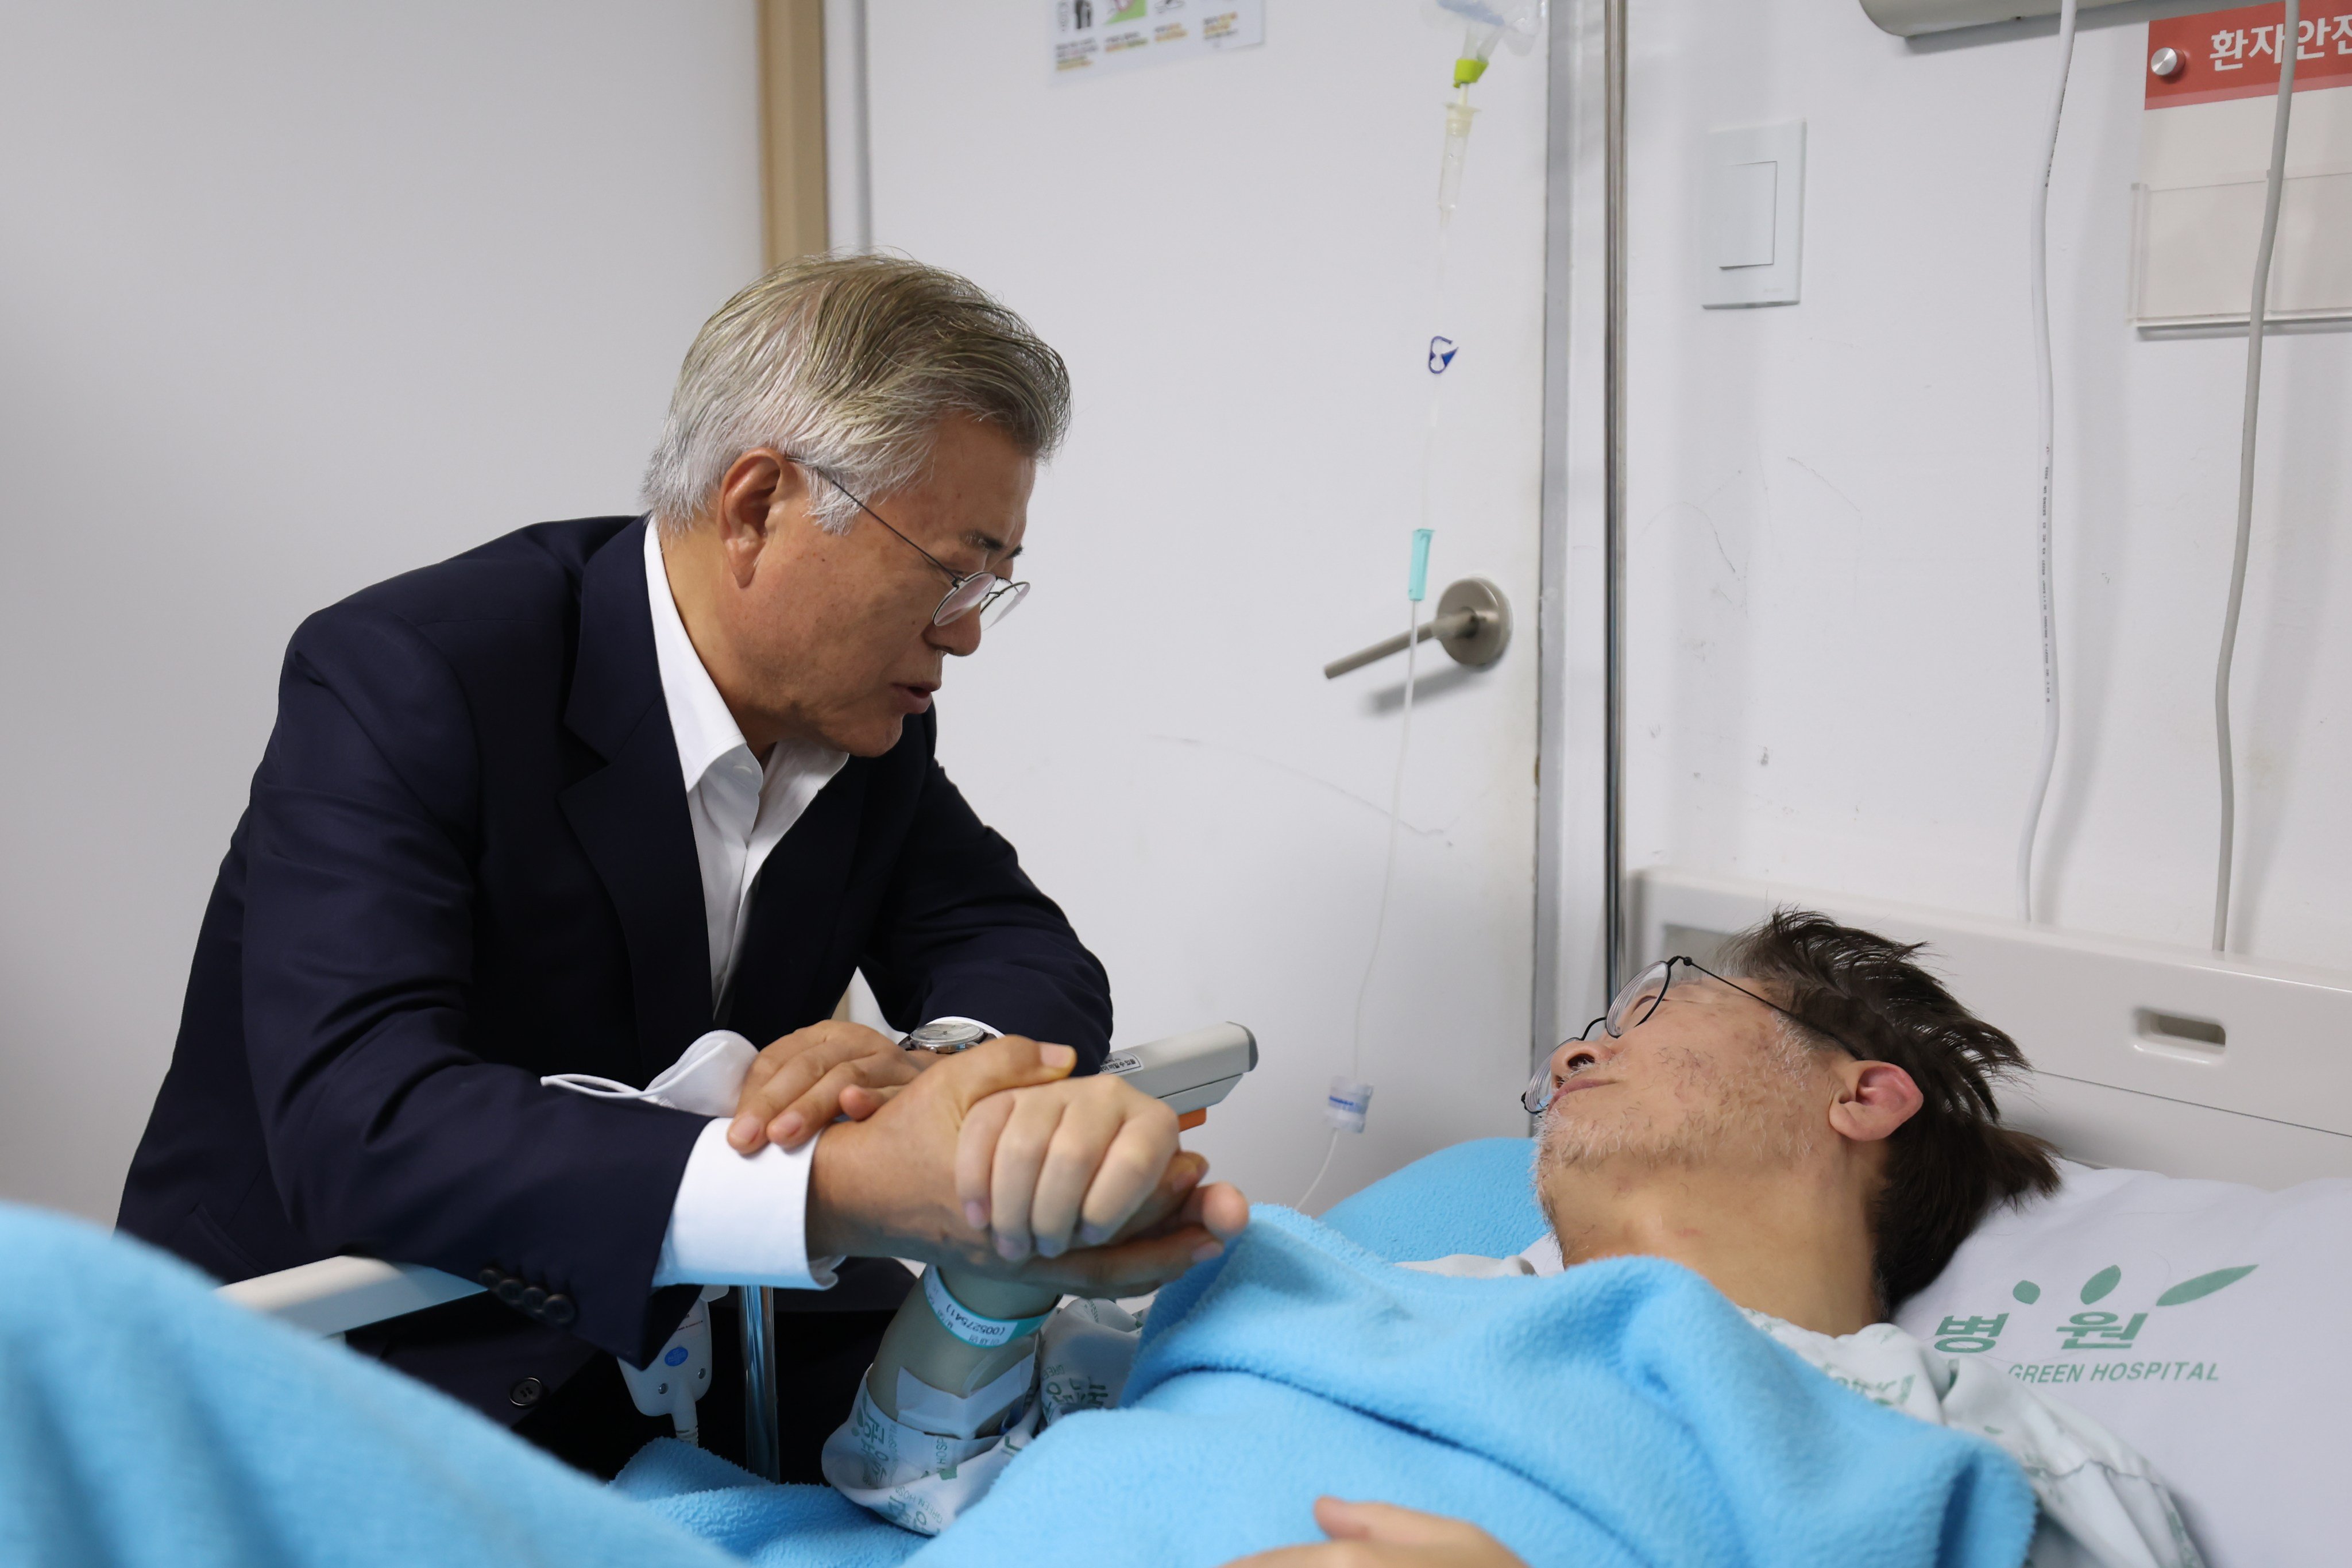 Former South Korean president Moon Jae-in consoles Lee Jae-myung, head of the main opposition Democratic Party, at a hospital in Seoul following Lee’s hunger strike. Photo: YNA/dpa